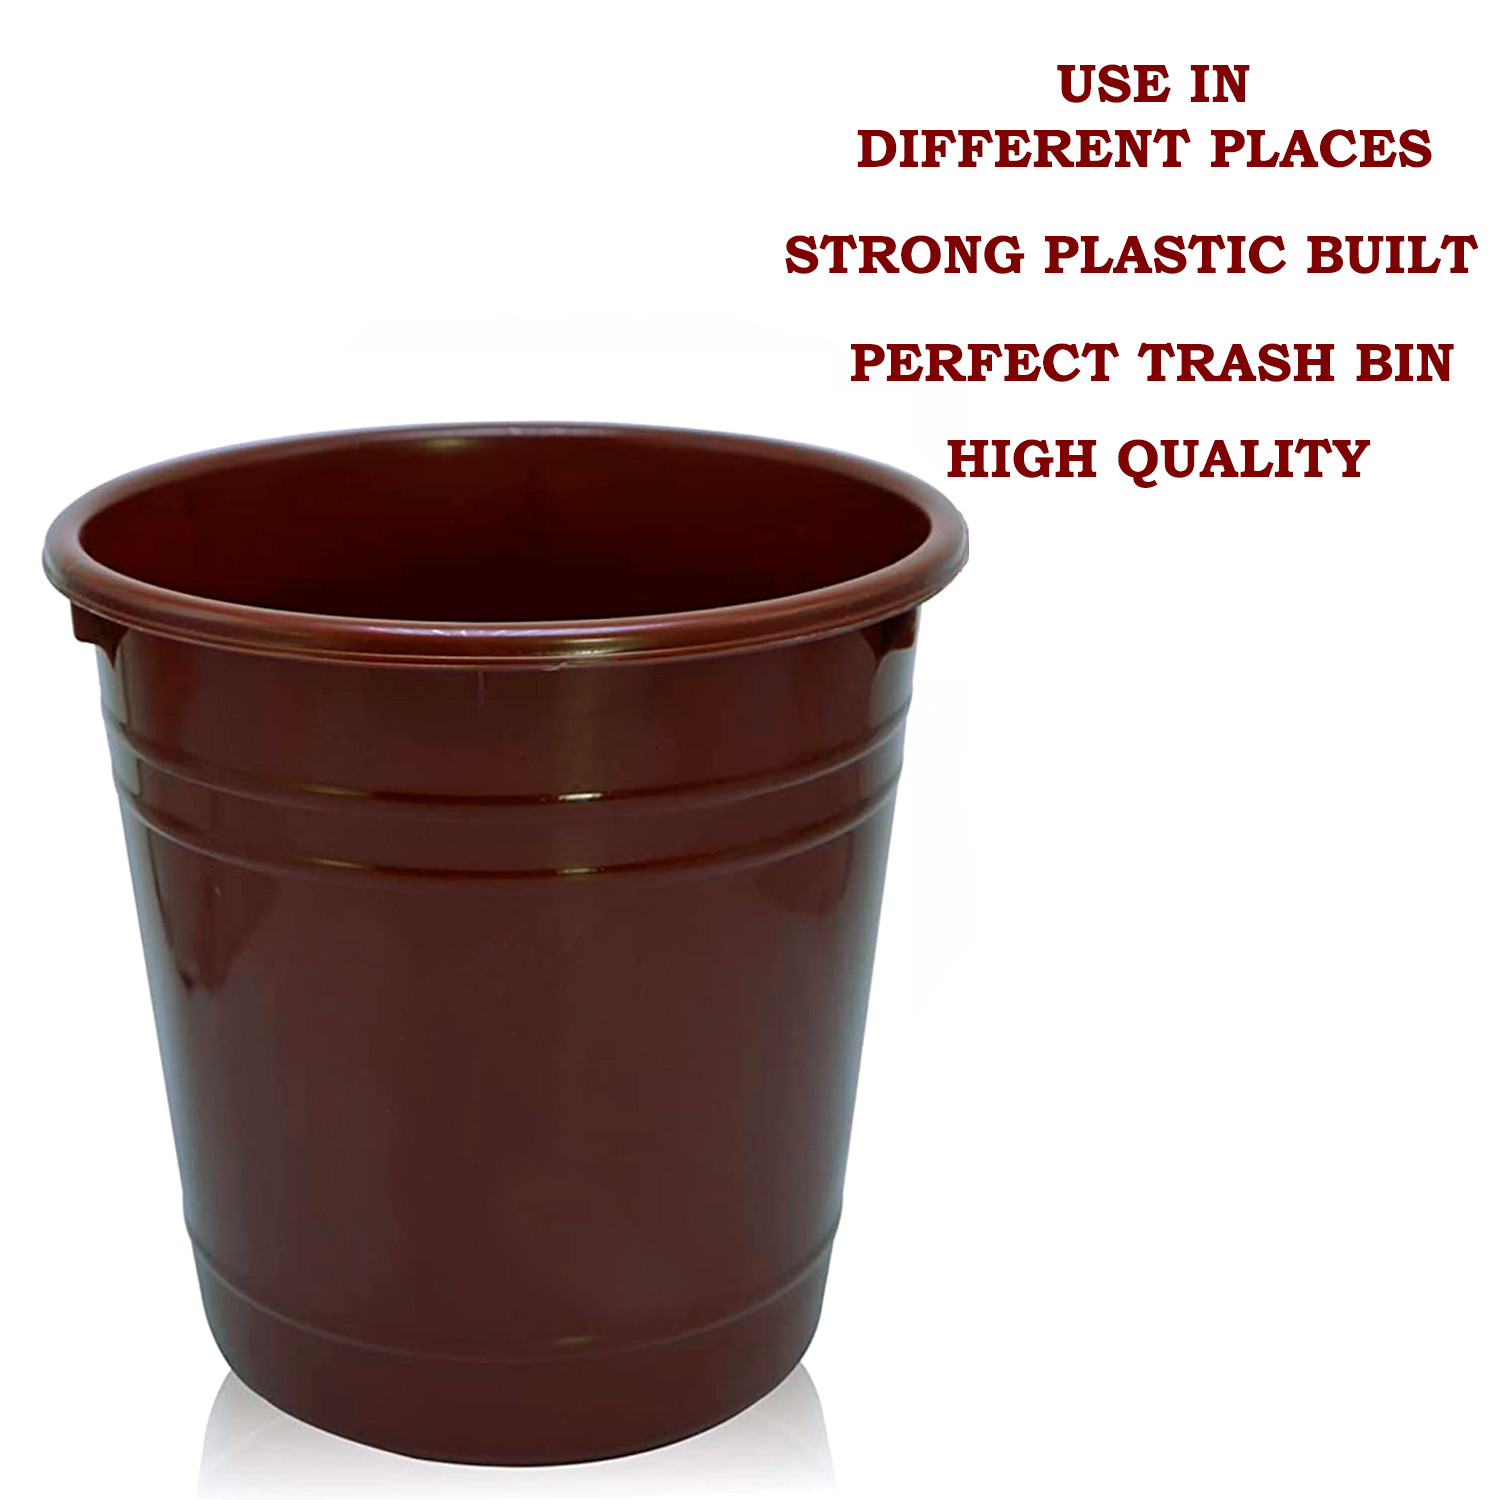 Kuber Industries Plastic Dustbin|Portable Garbage Basket & Round Trash Can for Home,Kitchen,Office,College,5 Ltr.(Brown)